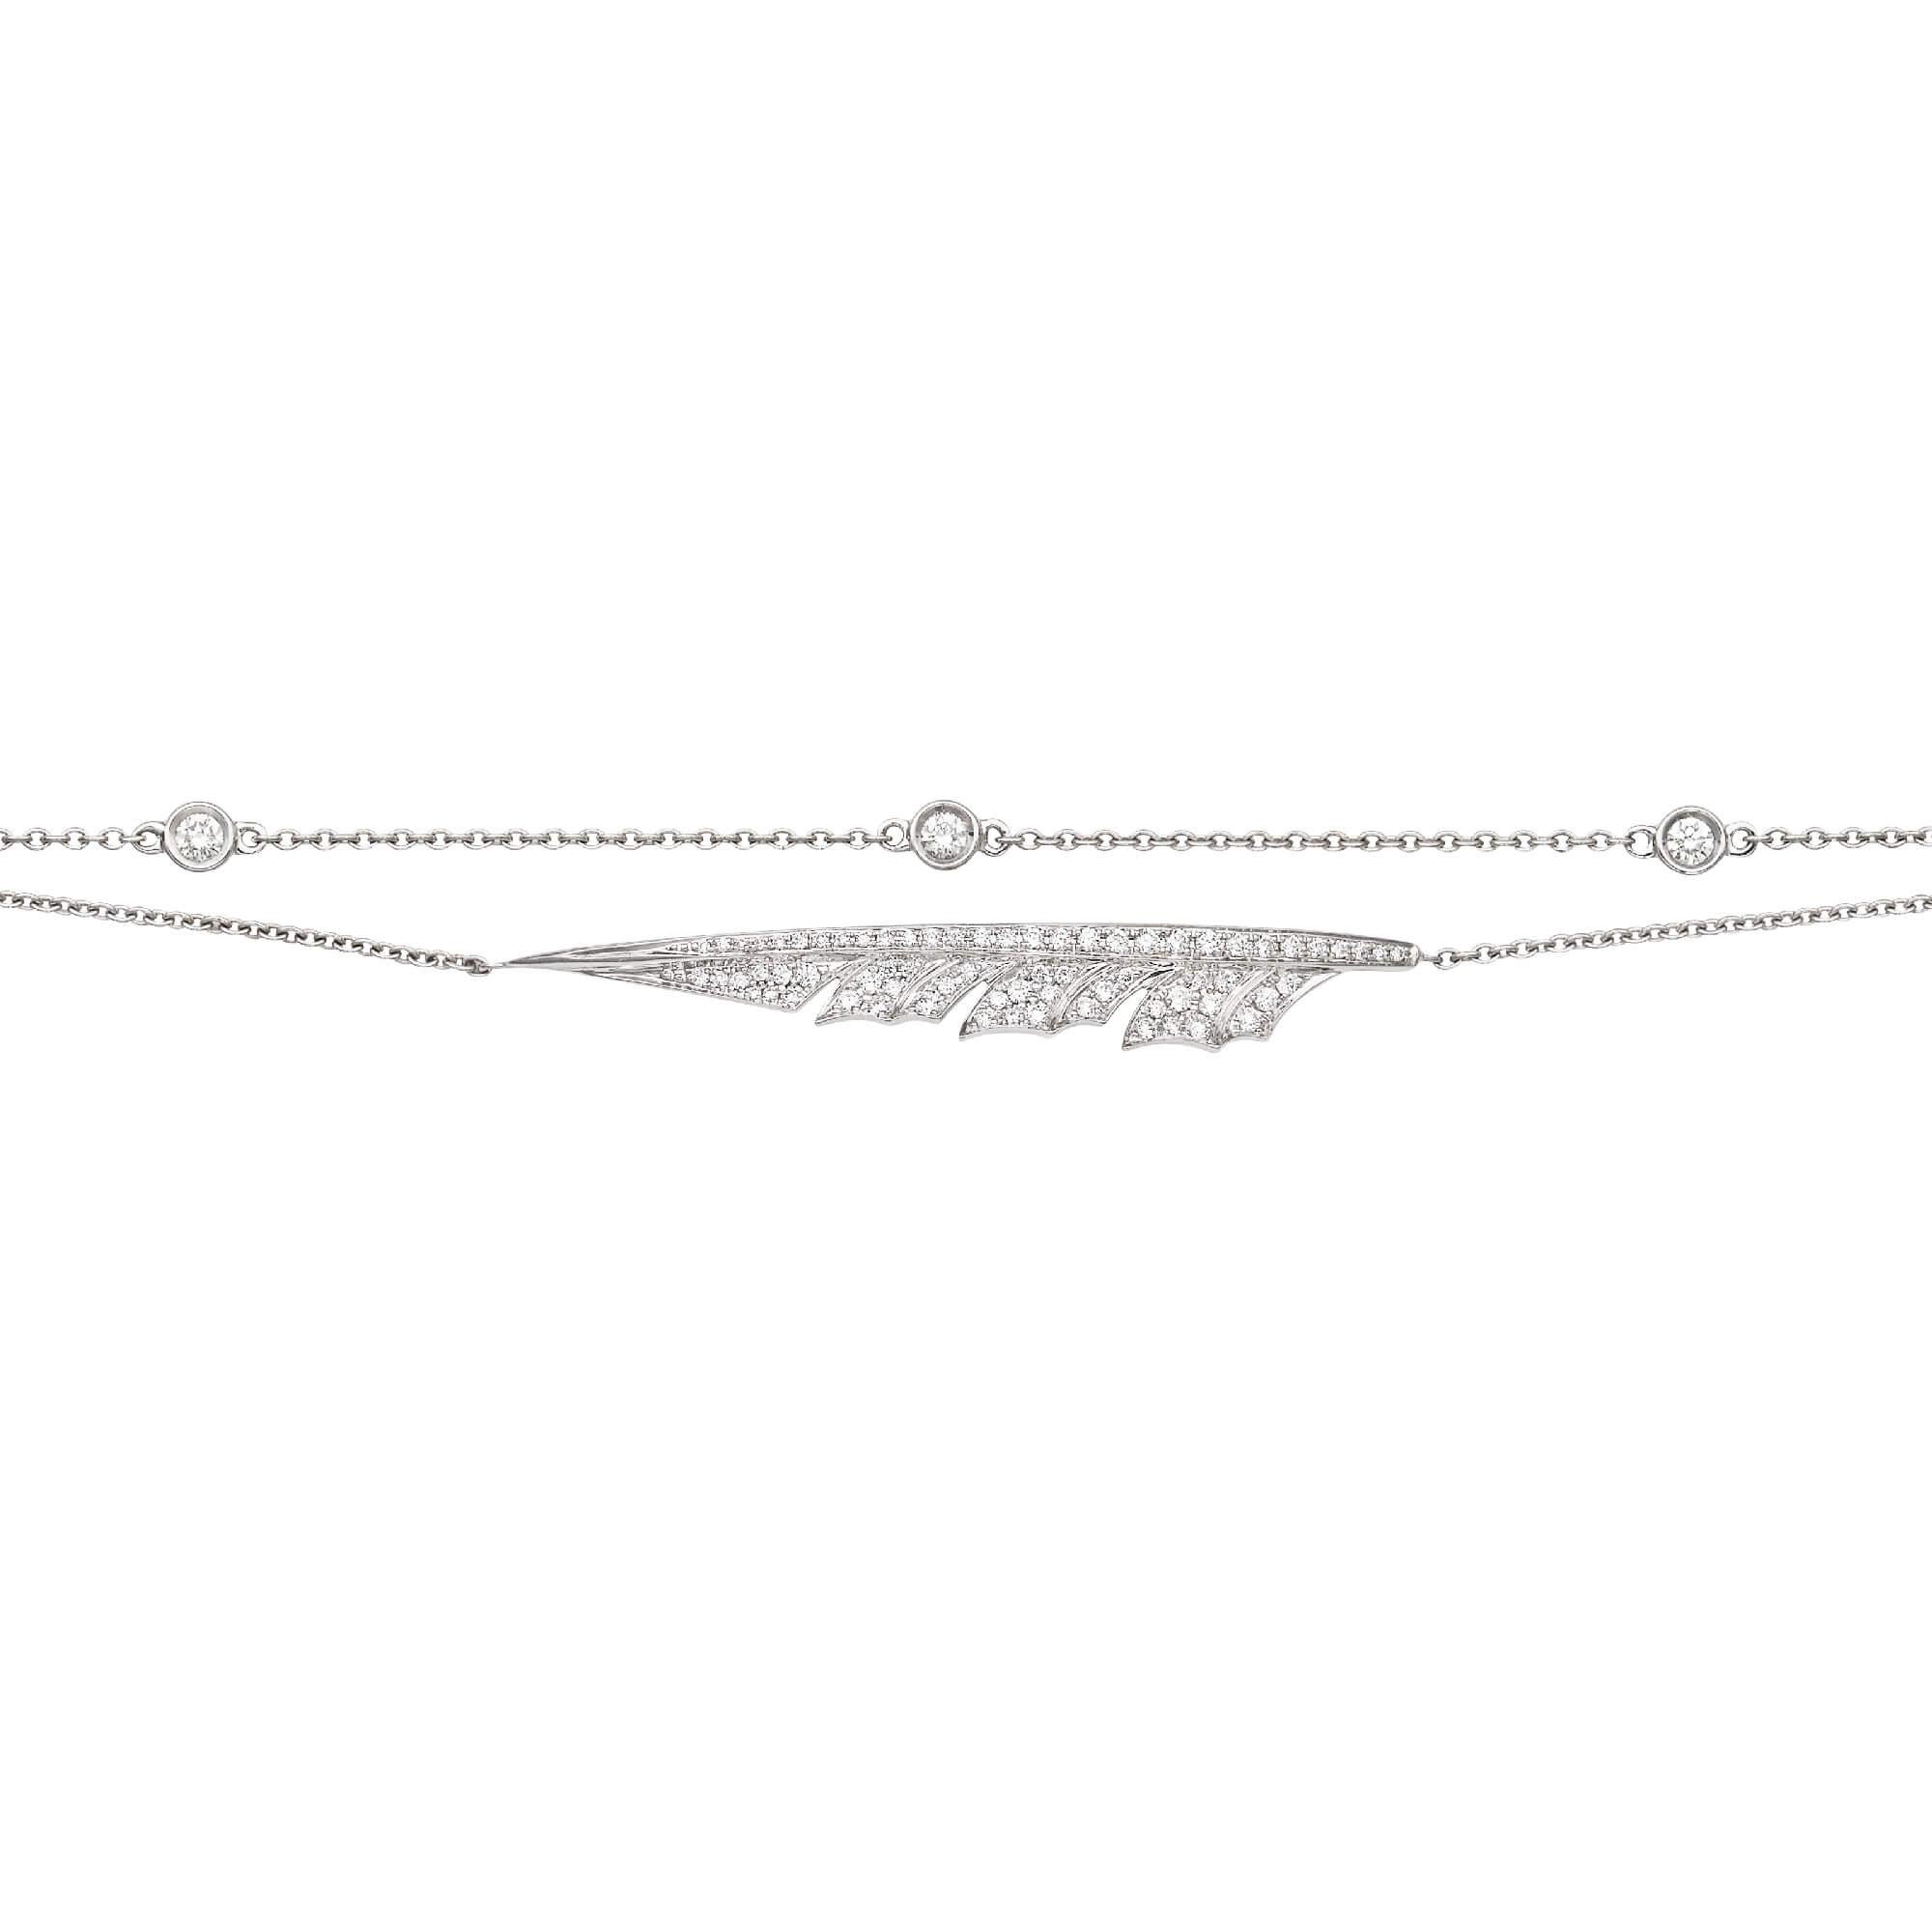 Magnipheasant Pave Feather Bracelet set in 18ct white gold fully set with white Diamond pave 0.42ct.

Please enquire for your exclusive price if your delivery country is outside of the United Kingdom.

Built on a foundation of 40 years of technical